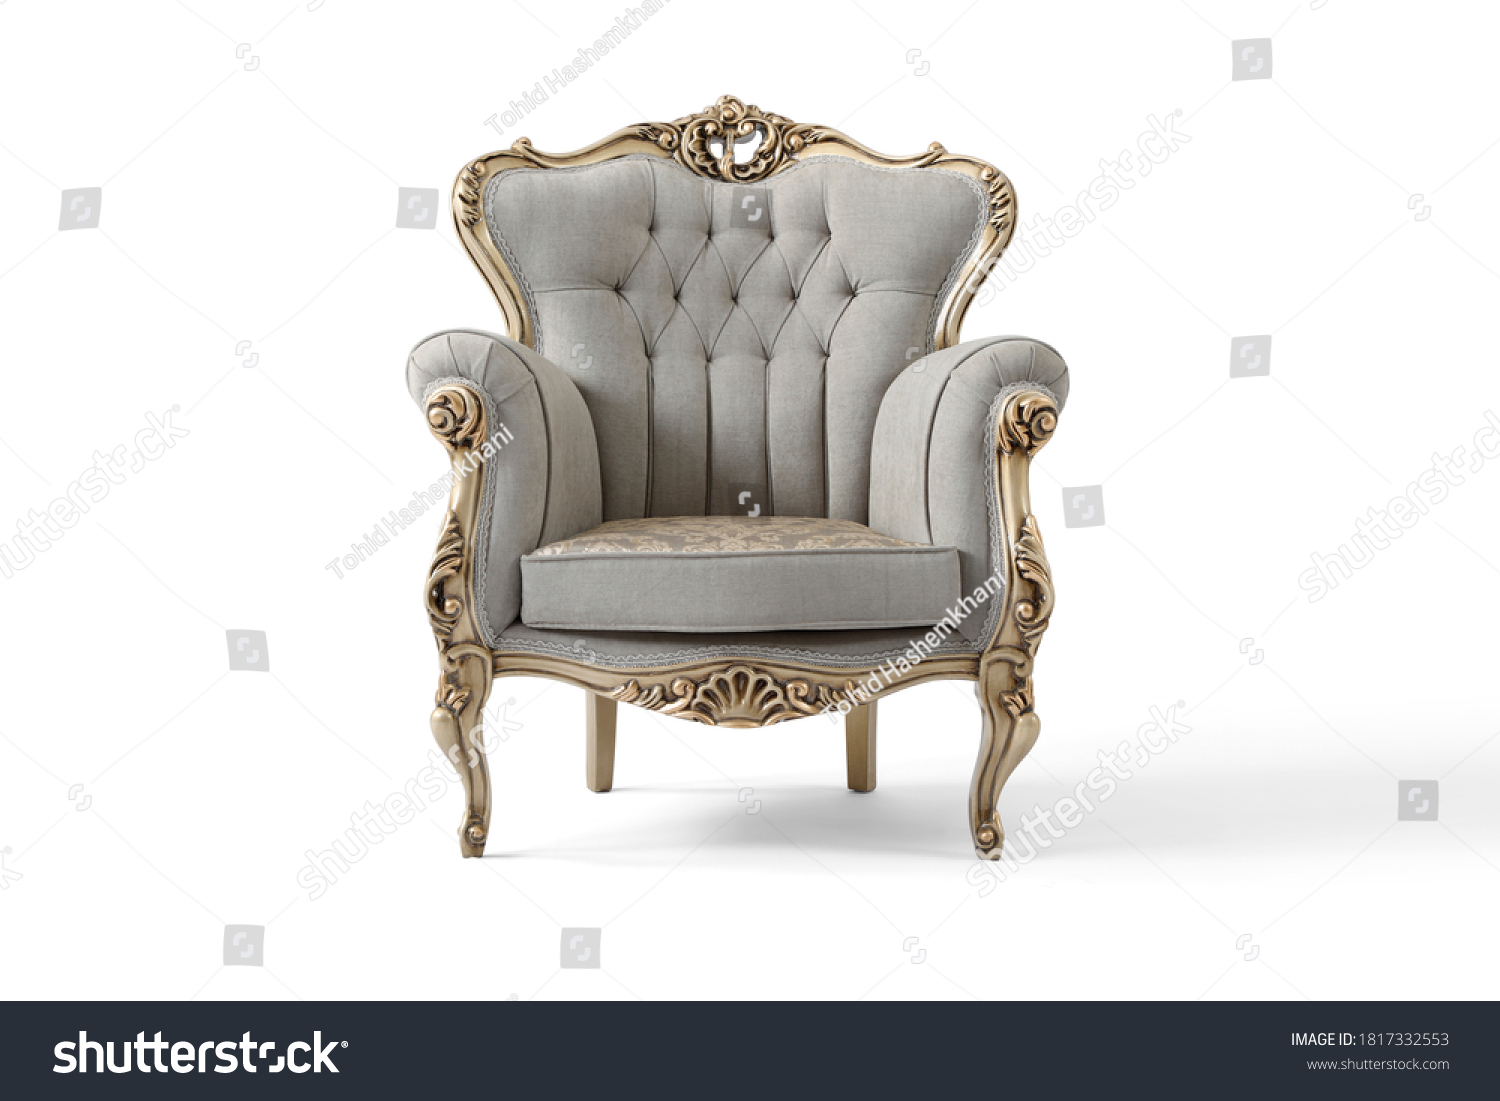 Classic Armchair Isolated On White Background Stock Photo 1817332553 ...